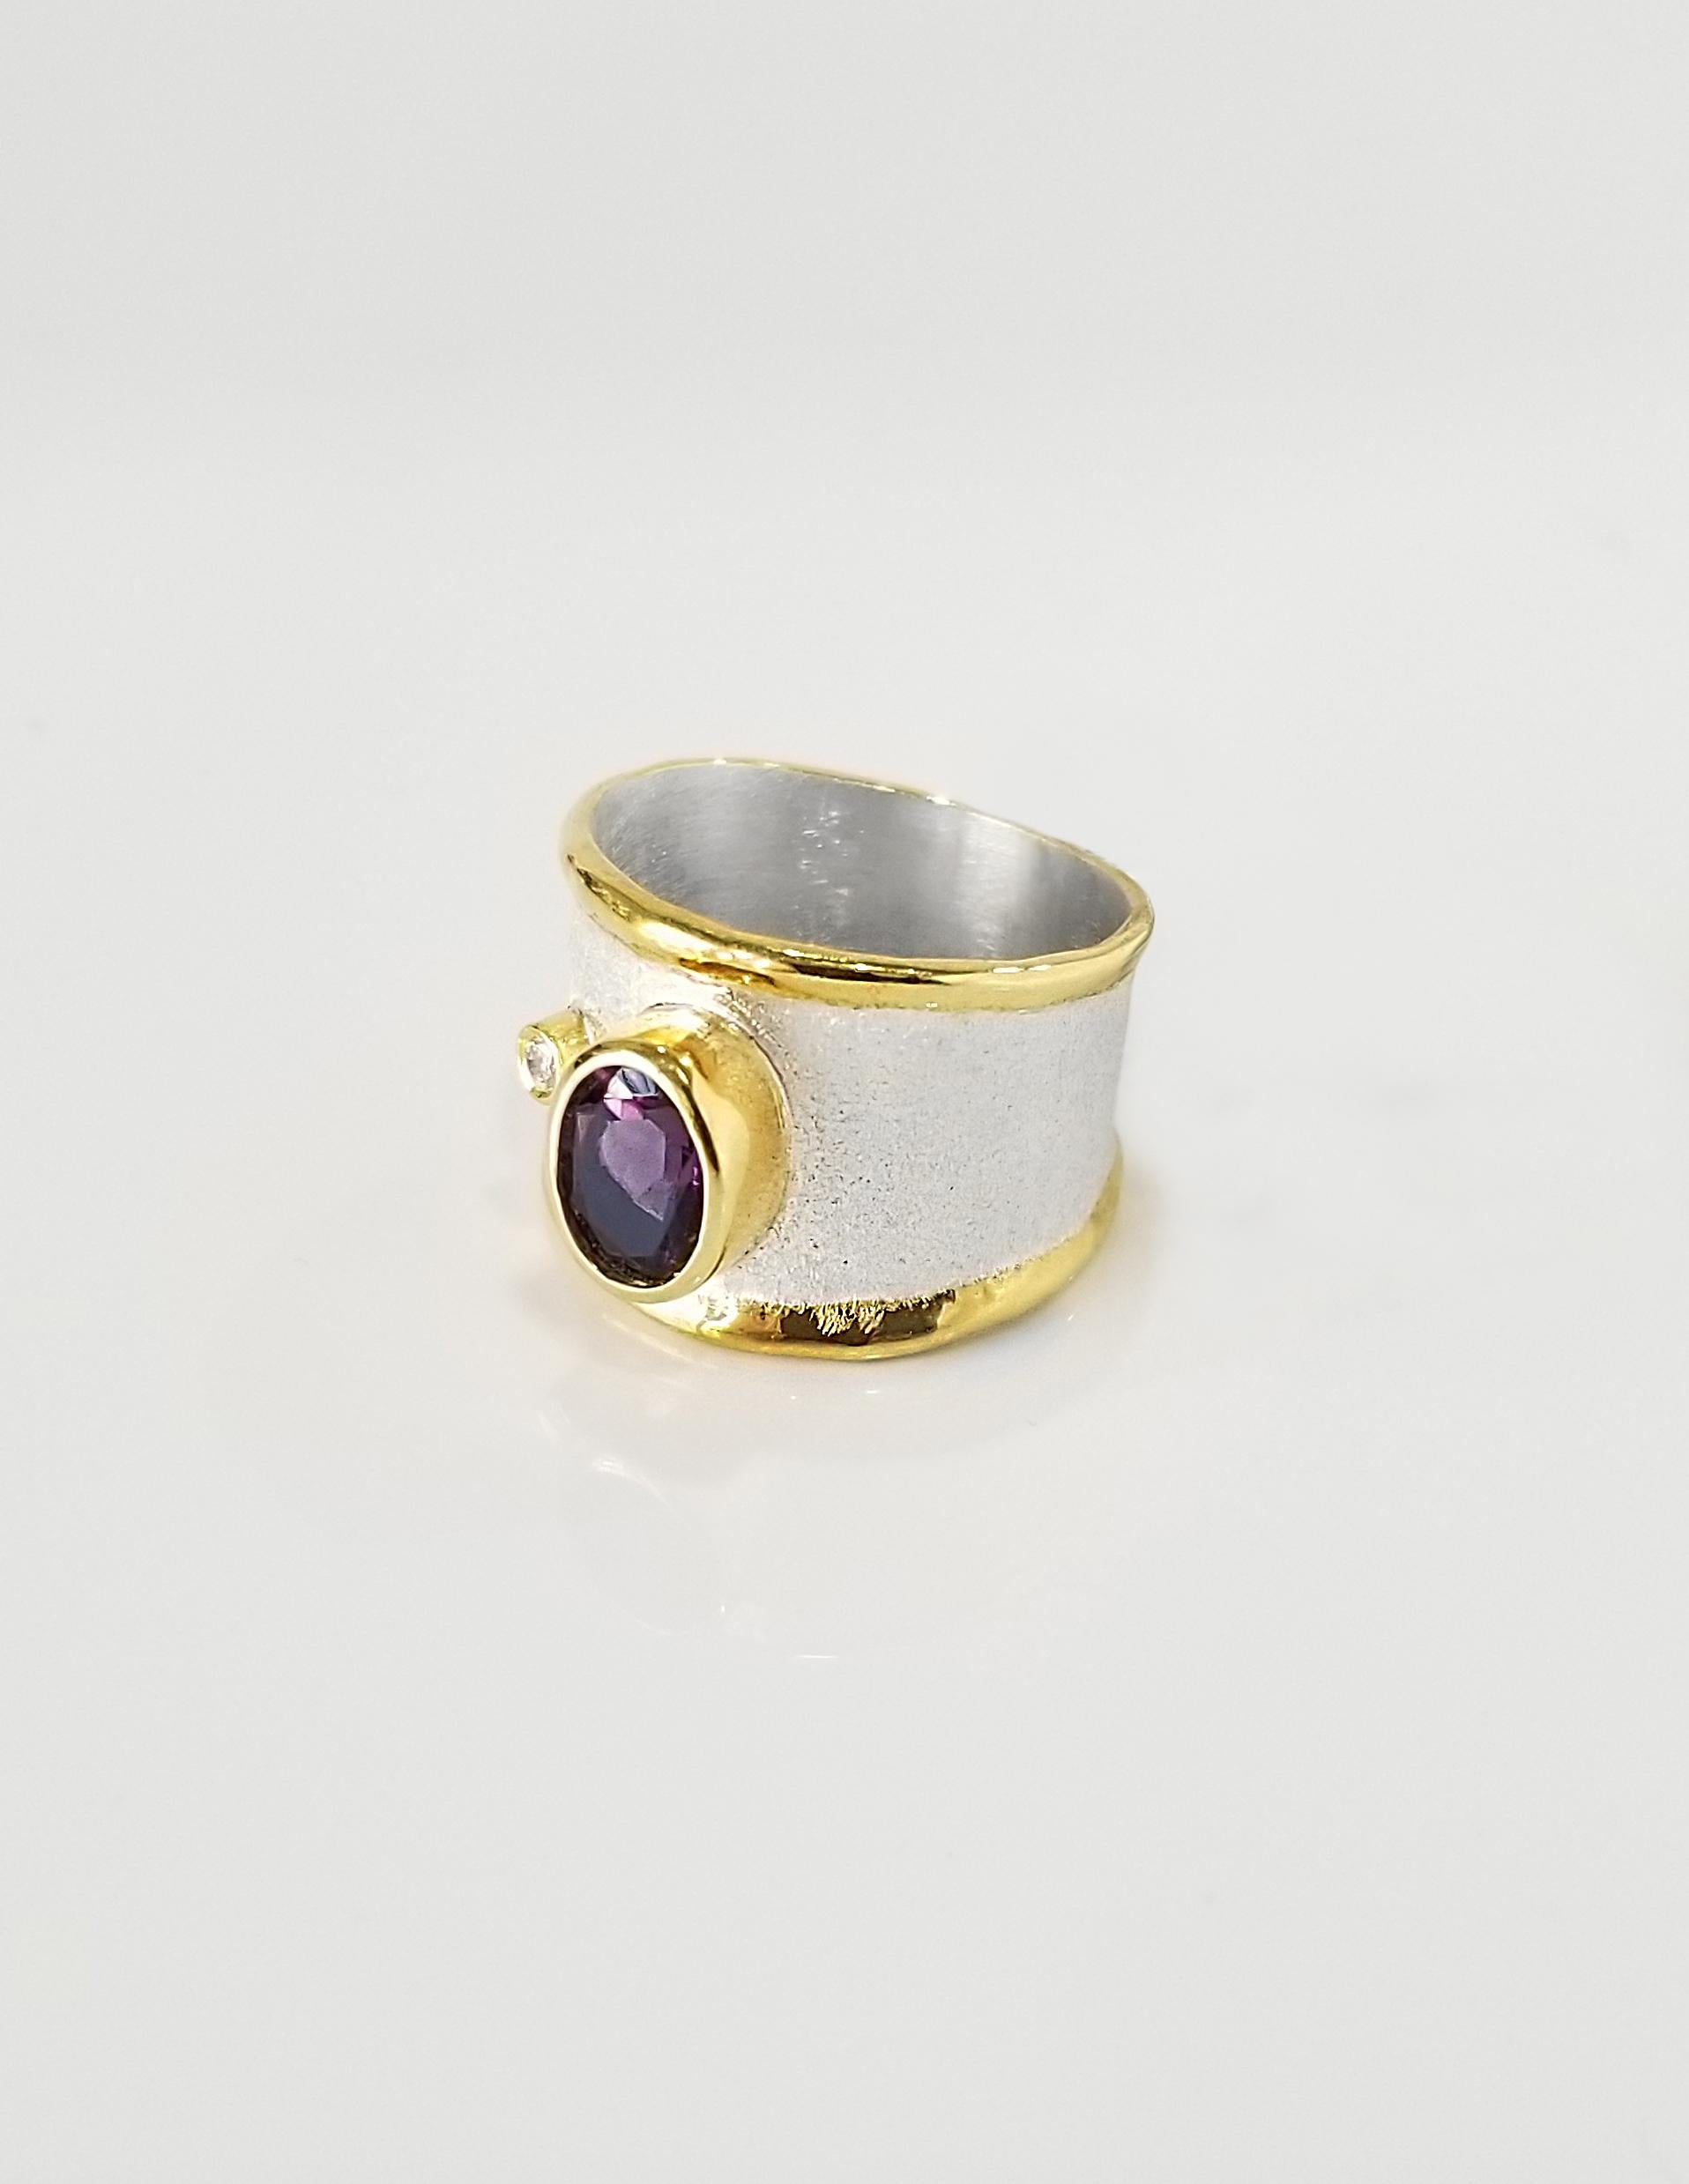 Yianni Creations Midas Collection 100% Handmade Artisan Ring from Fine Silver with an overlay of 24 Karat Yellow Gold features 1.25 Carat Amethyst accompanied by 0.03 Carat Diamond complimented by unique techniques of craftsmanship - brushed texture